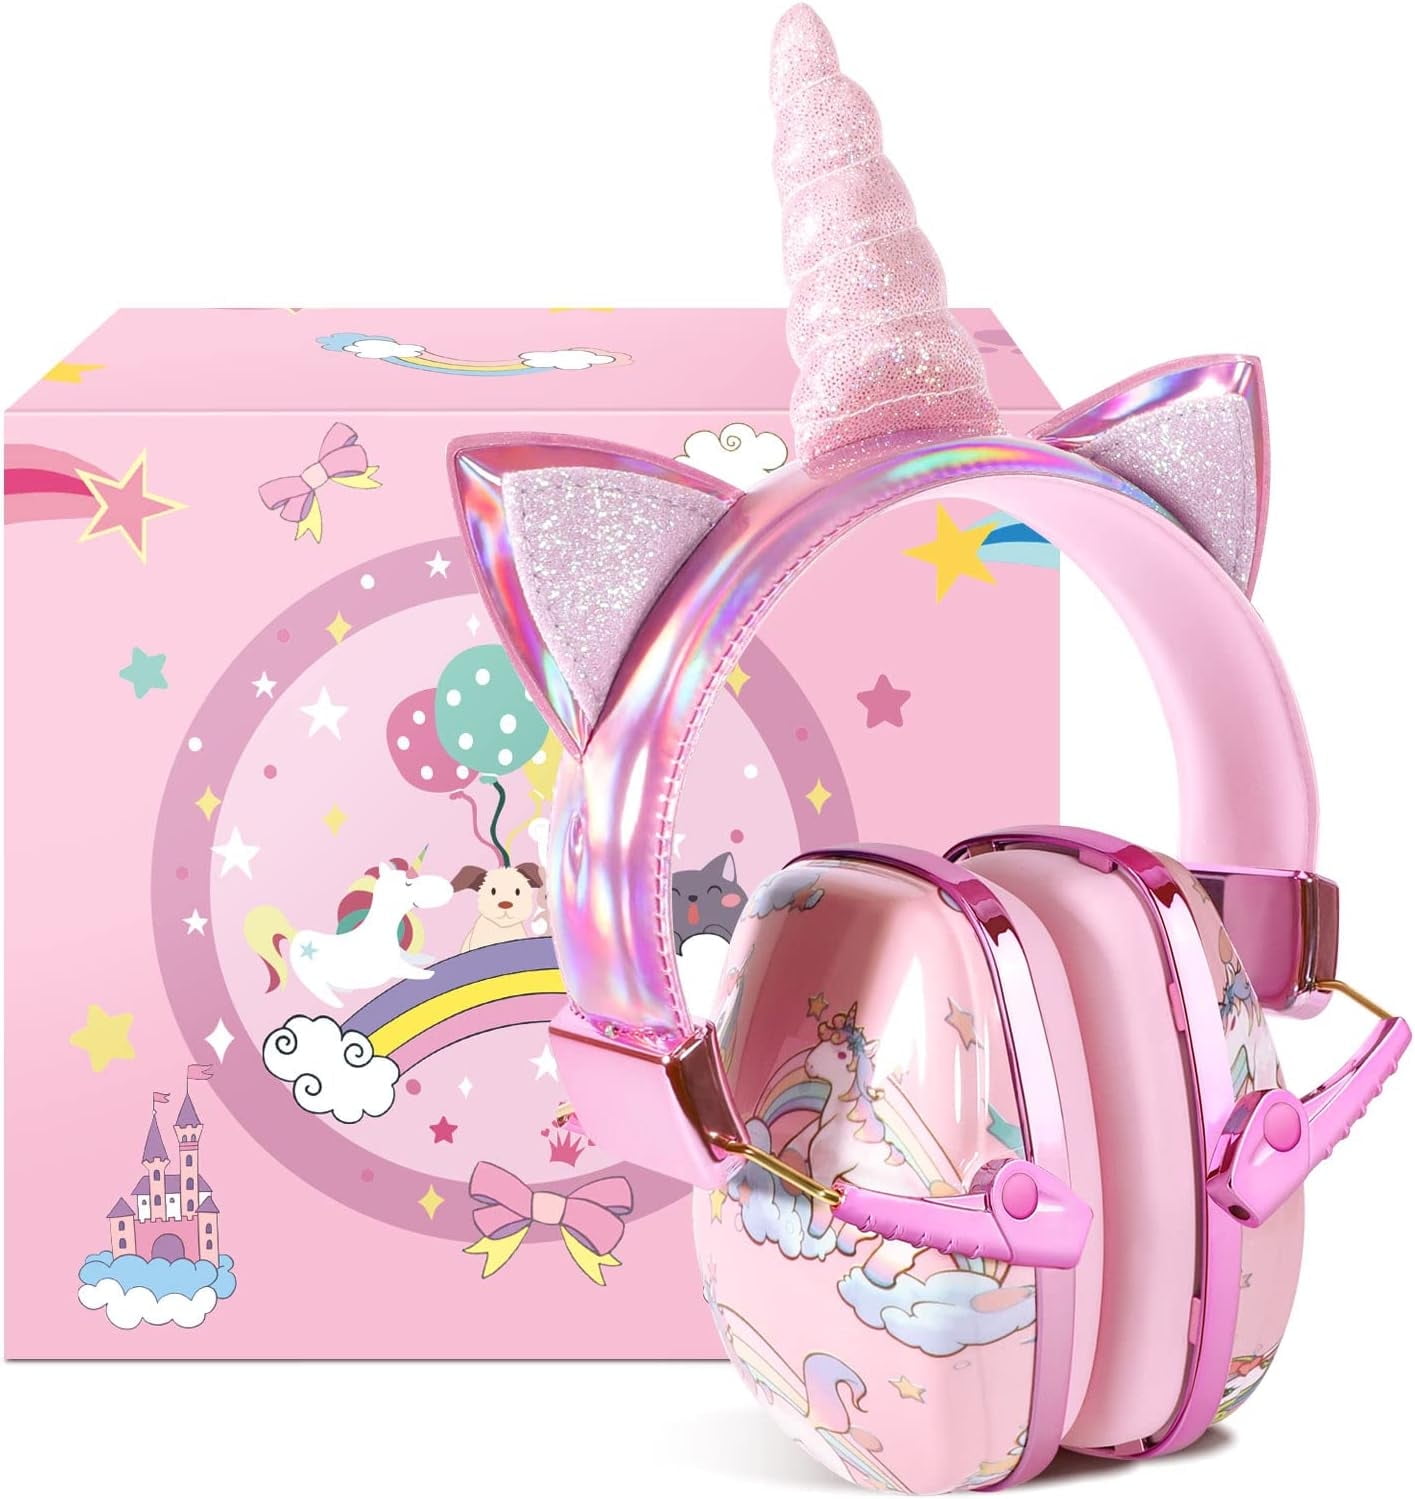 JYPS Kids Ear Protection,Noise Cancelling Sound Proof Headphones for  Toddlers Children Teens,Sound Blocking Kids Hearing Protection Earmuffs for  Concerts,Autism,Unicorn Gifts for Girls Age 1 Up 